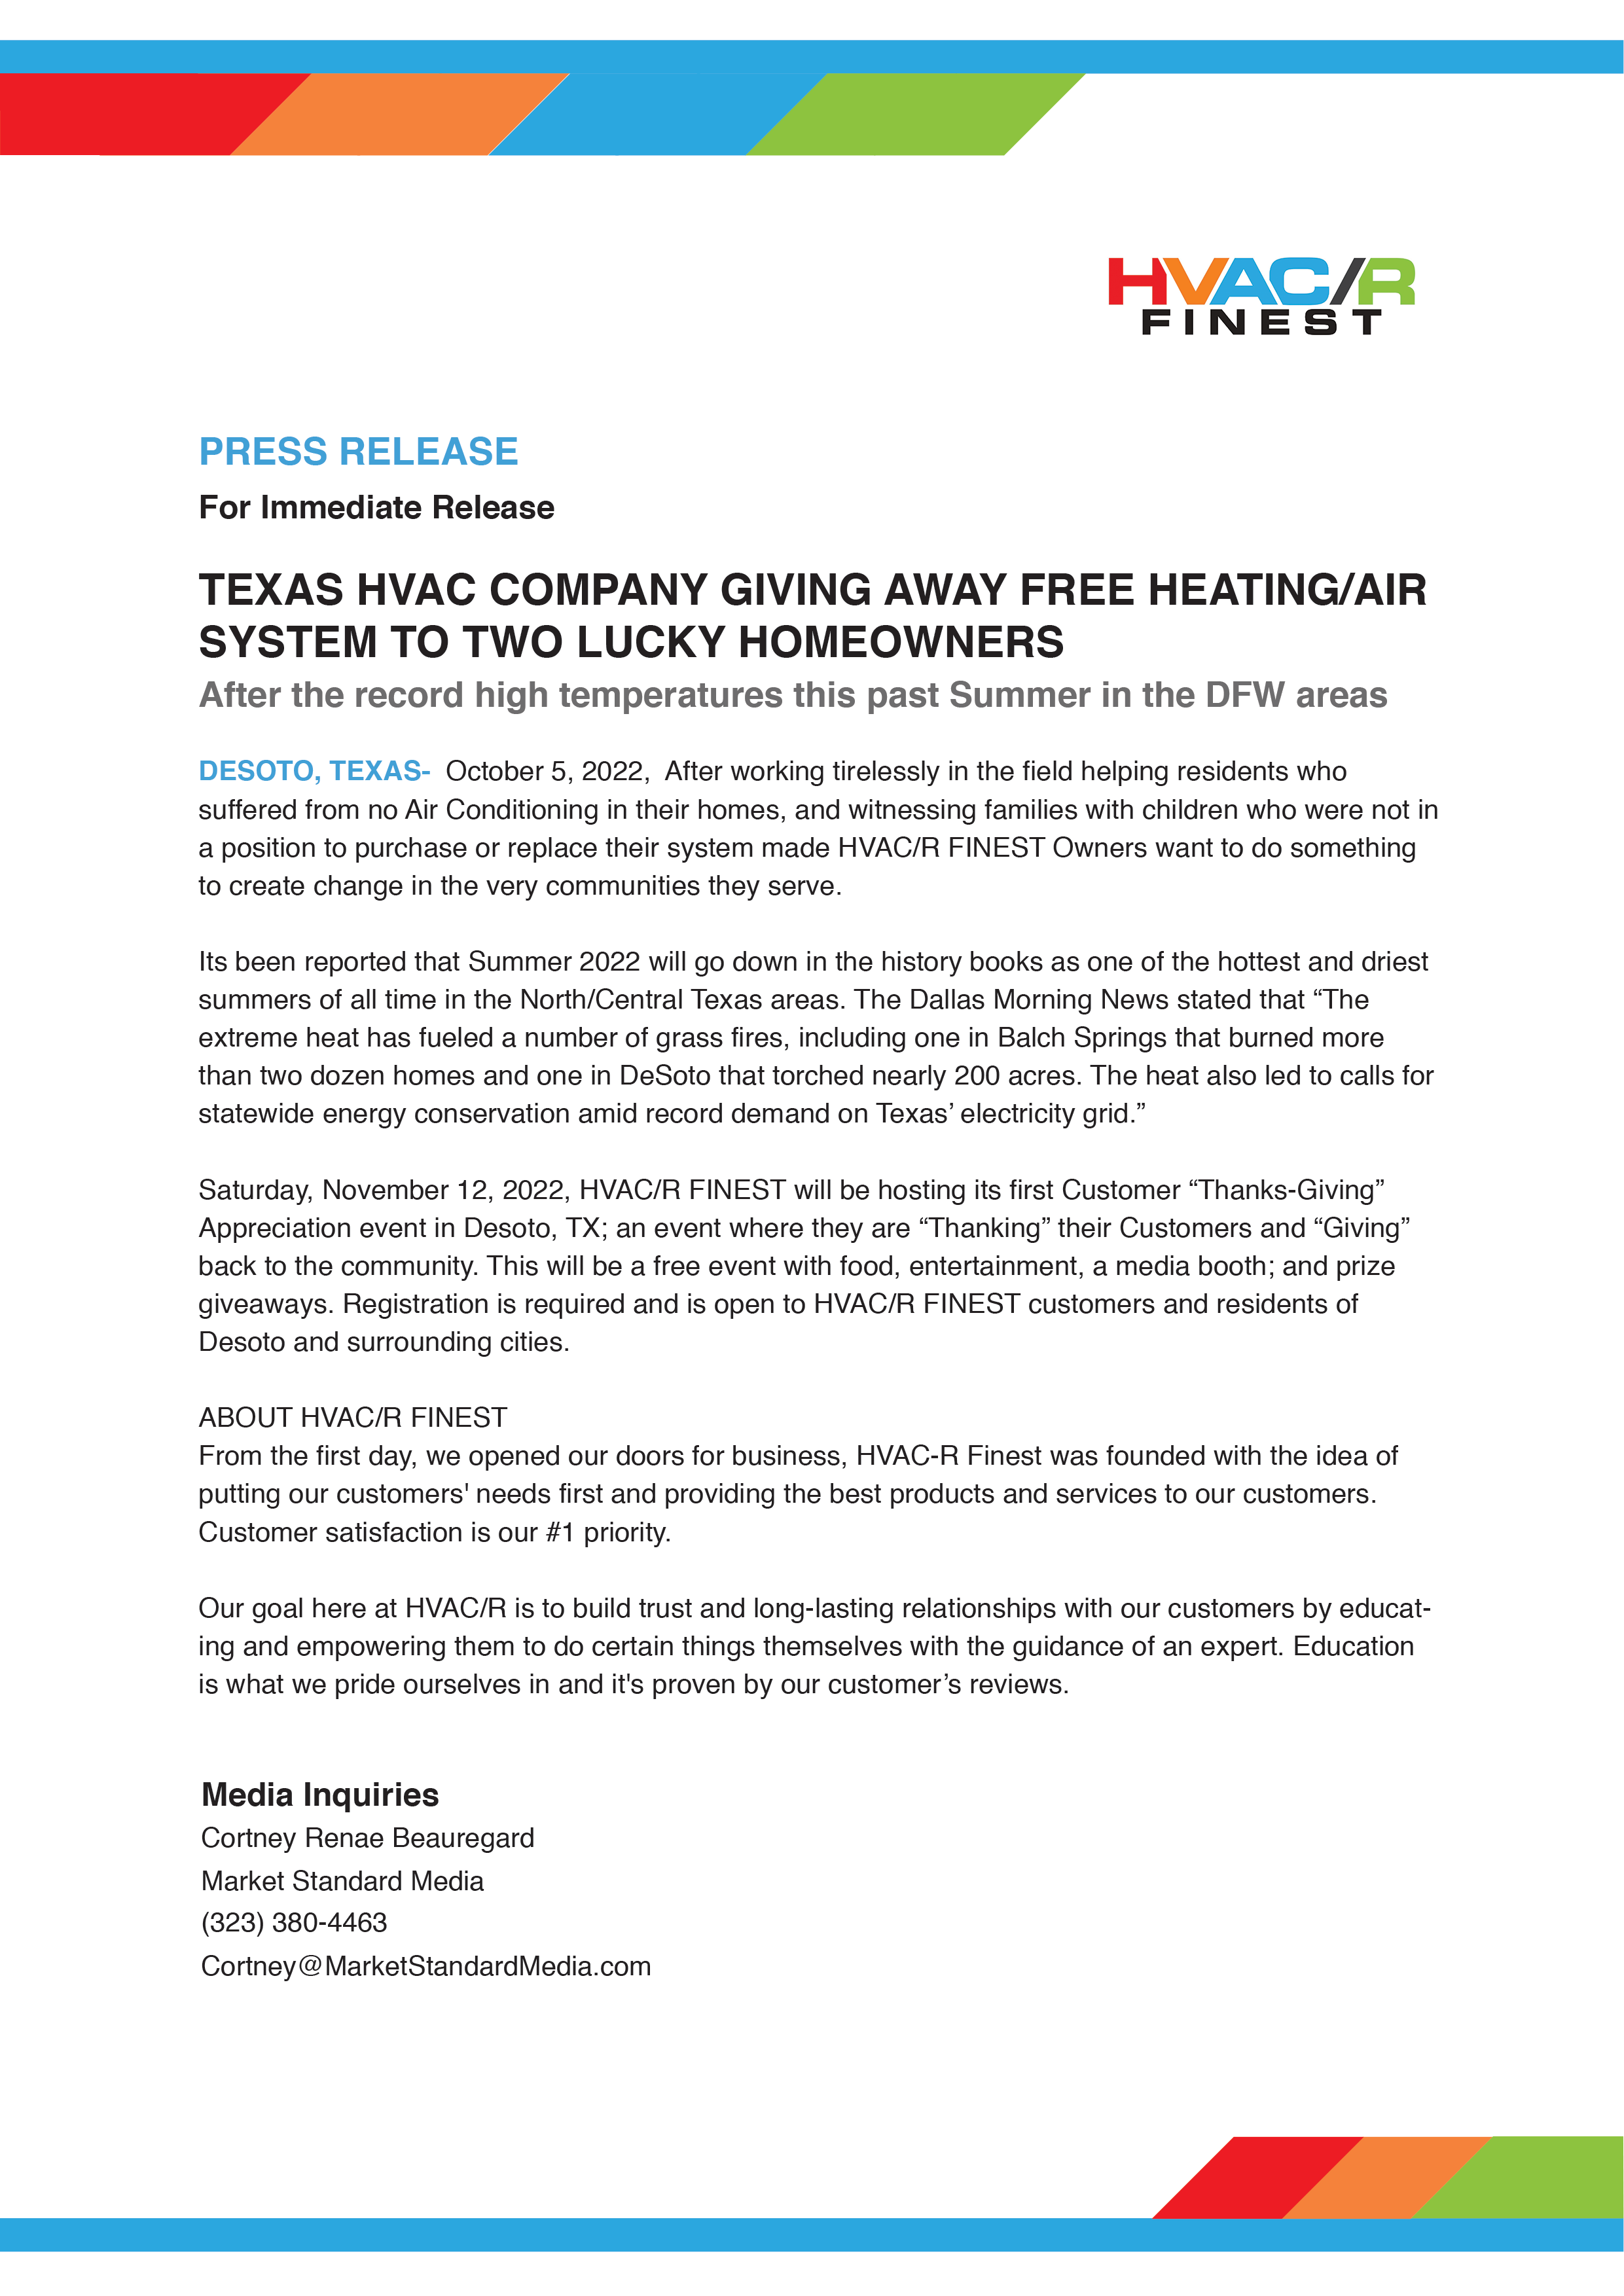 PRESS RELEASE: Texas HVAC company gives away FREE system to Two Lucky Homeowners